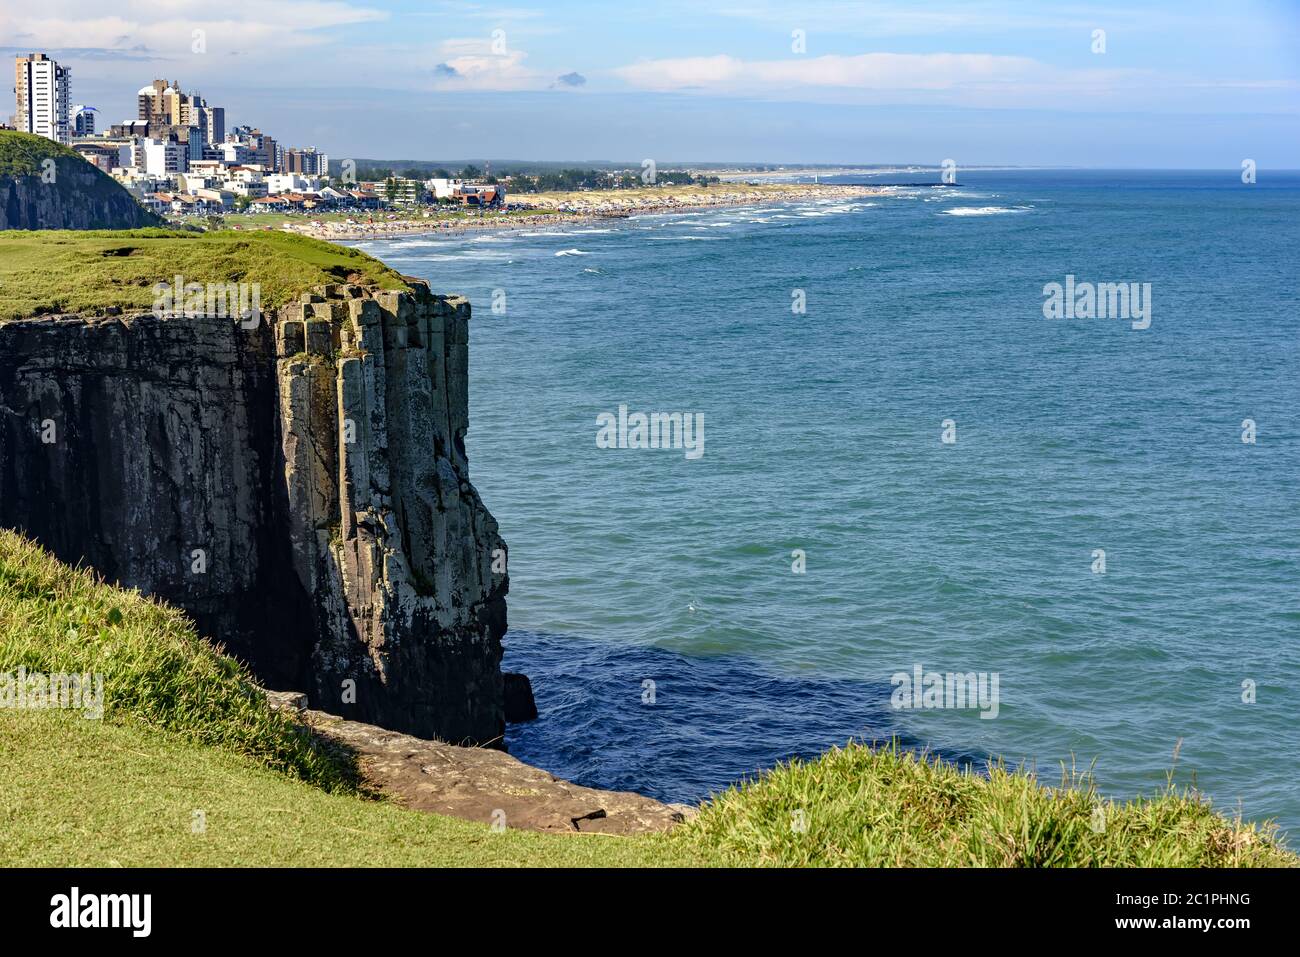 Guarita stone geological formation with Torres city Stock Photo